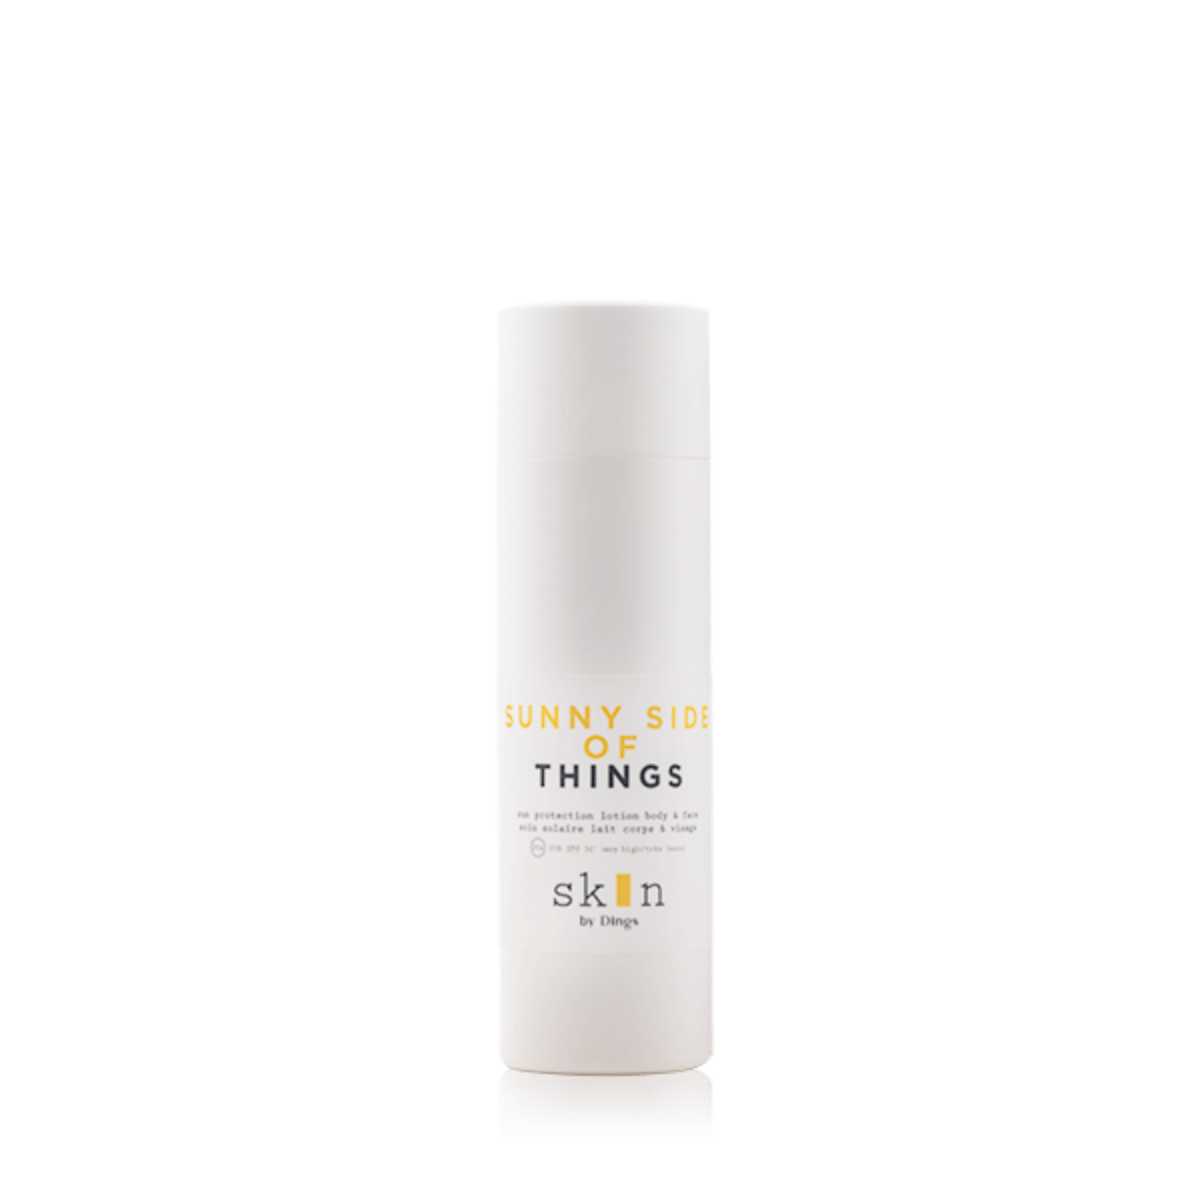 Sunny Side Of Things: Sun protection body & face lotion SPF 50+ - The Natural Beauty Club